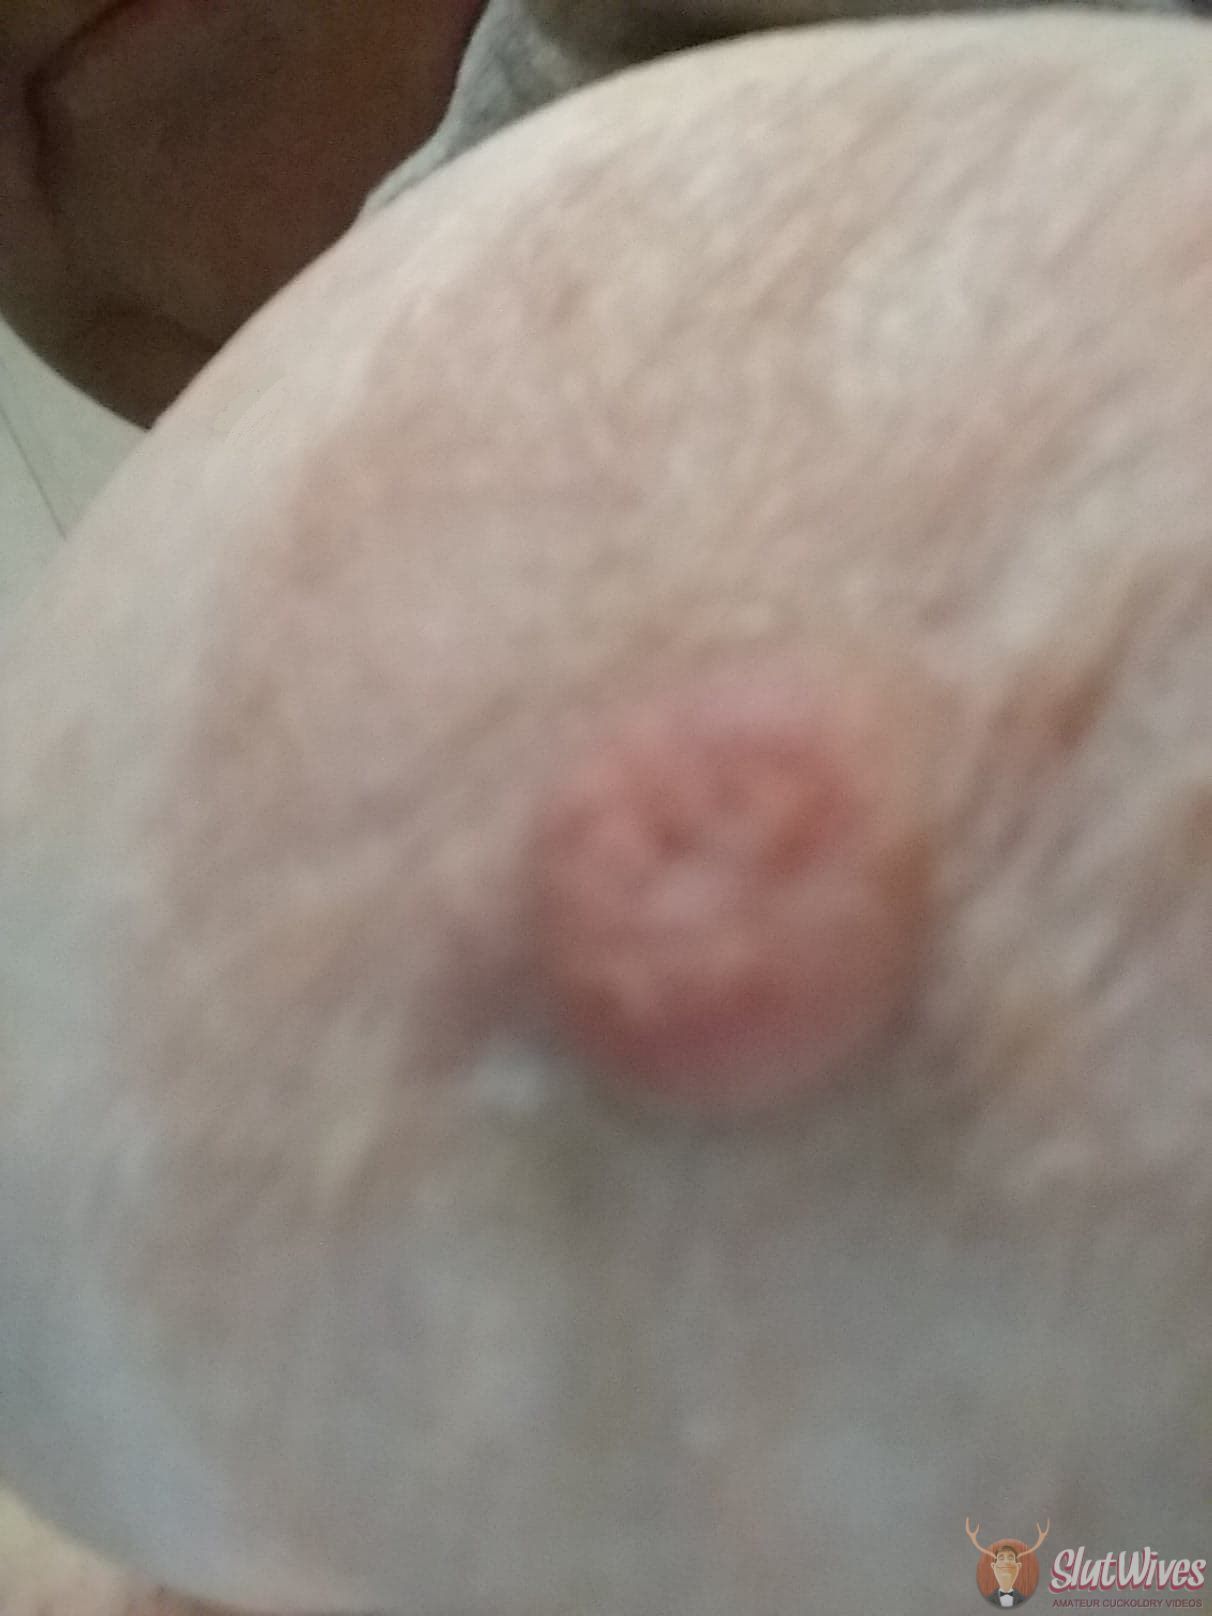 Wife's Excited Nipple